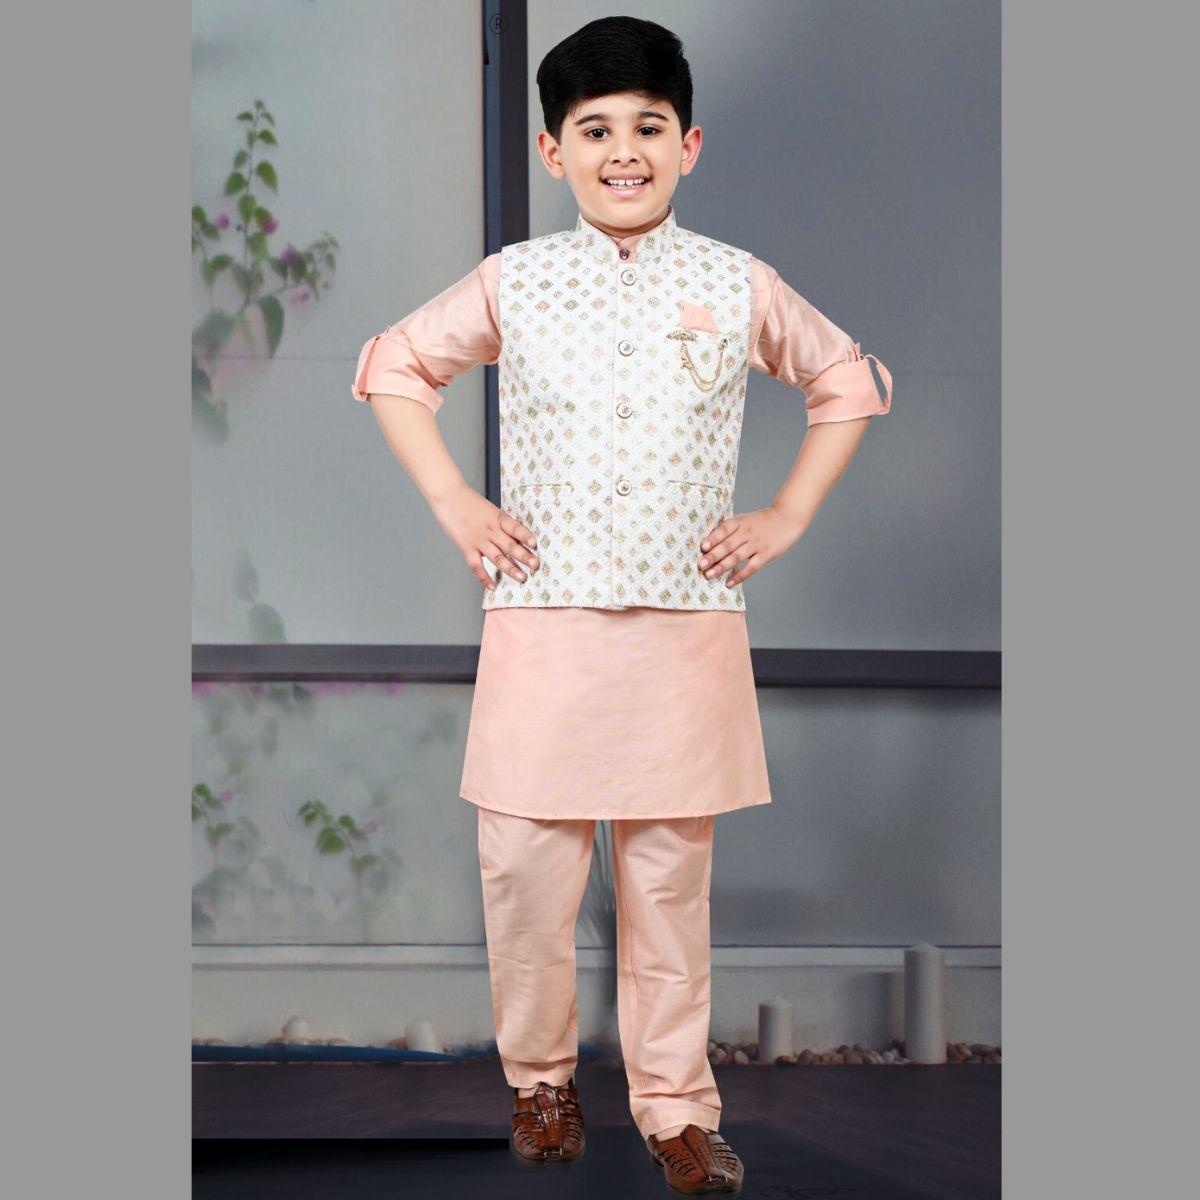 Wedding Kids Outfit Stylish Little Boys Stylish Kids Stylish Baby  #kidsoutfits #babydress #babydr | Kids fashion boy, Stylish little boys,  Stylish kids outfits